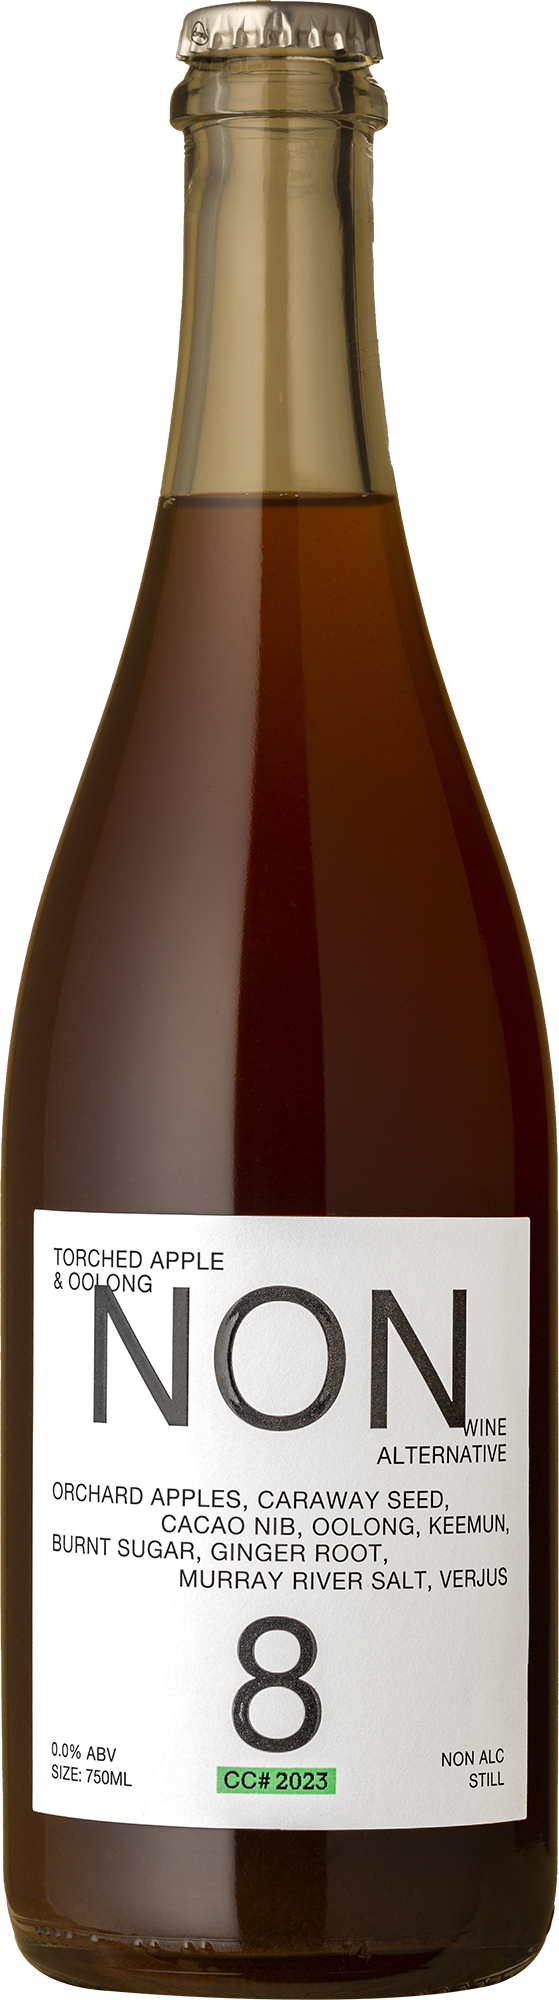 NON - No. 8 Torched Apple & Oolong Not Wine